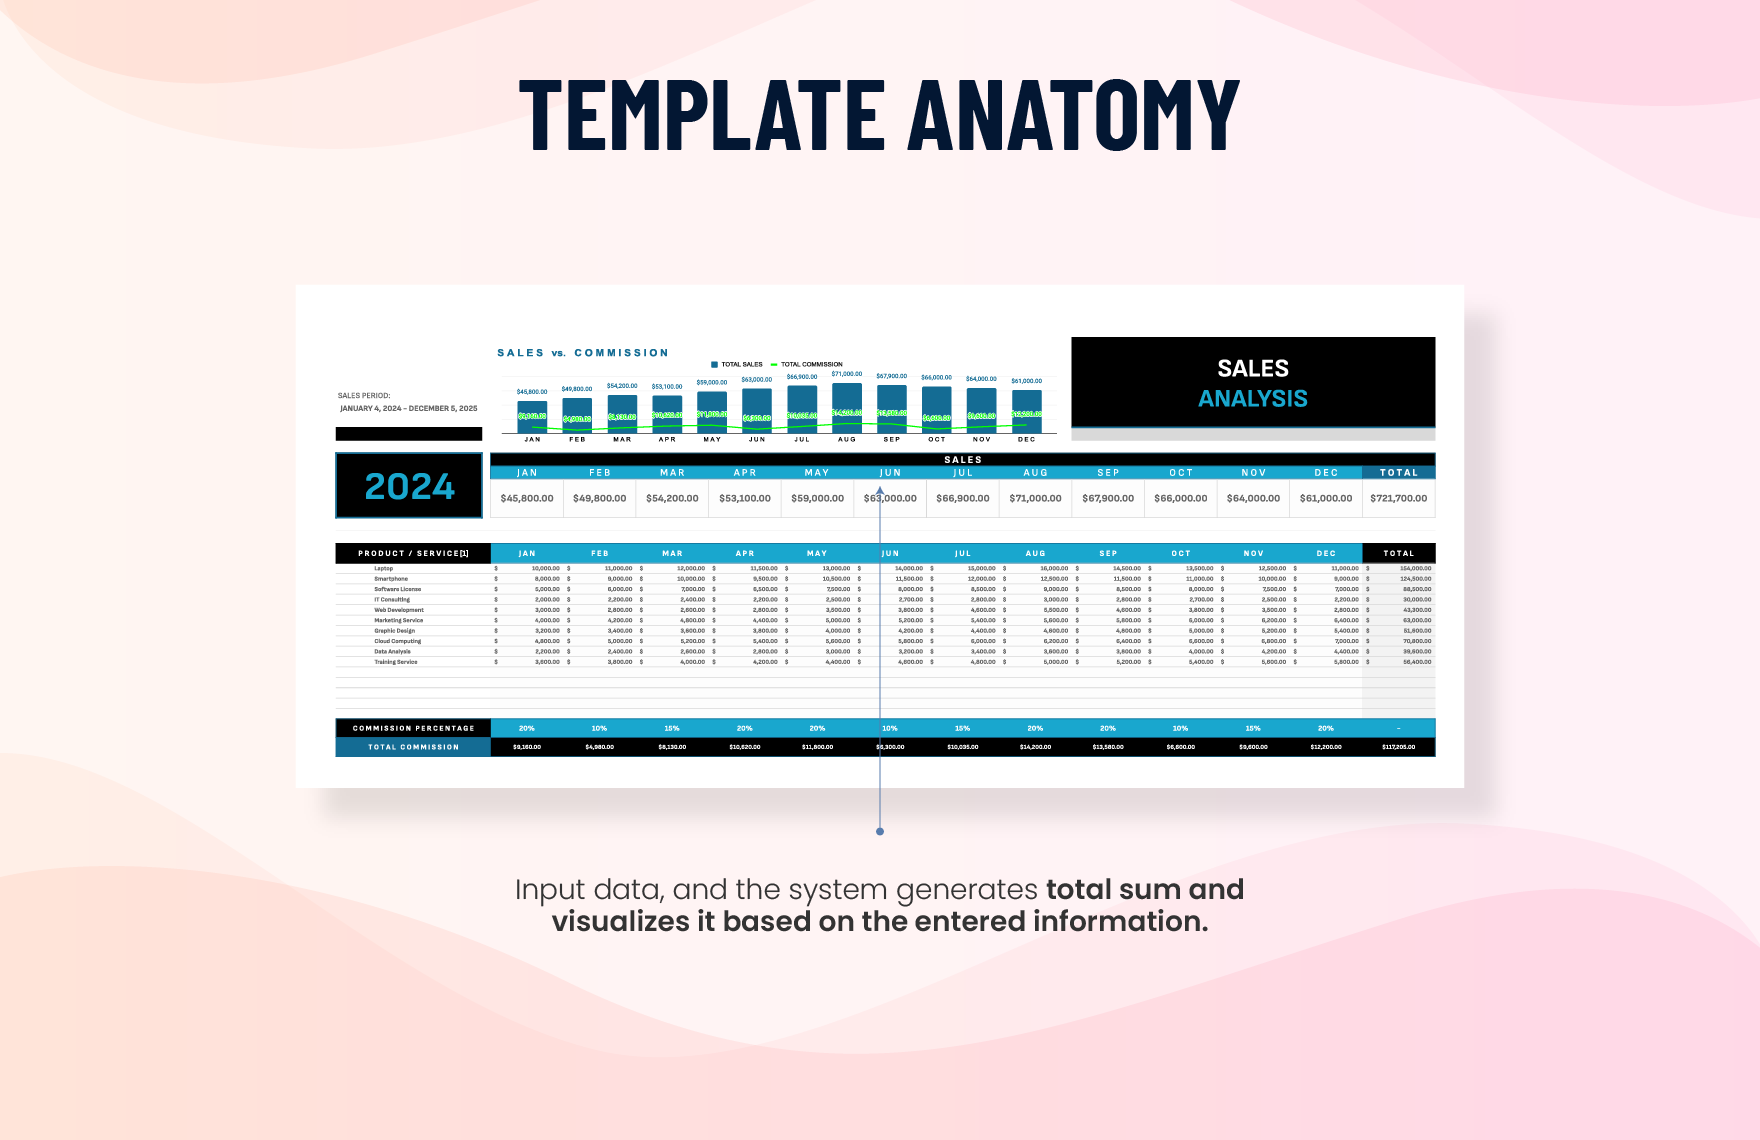 Sales Gross Sales vs. Commission Paid Analysis Template